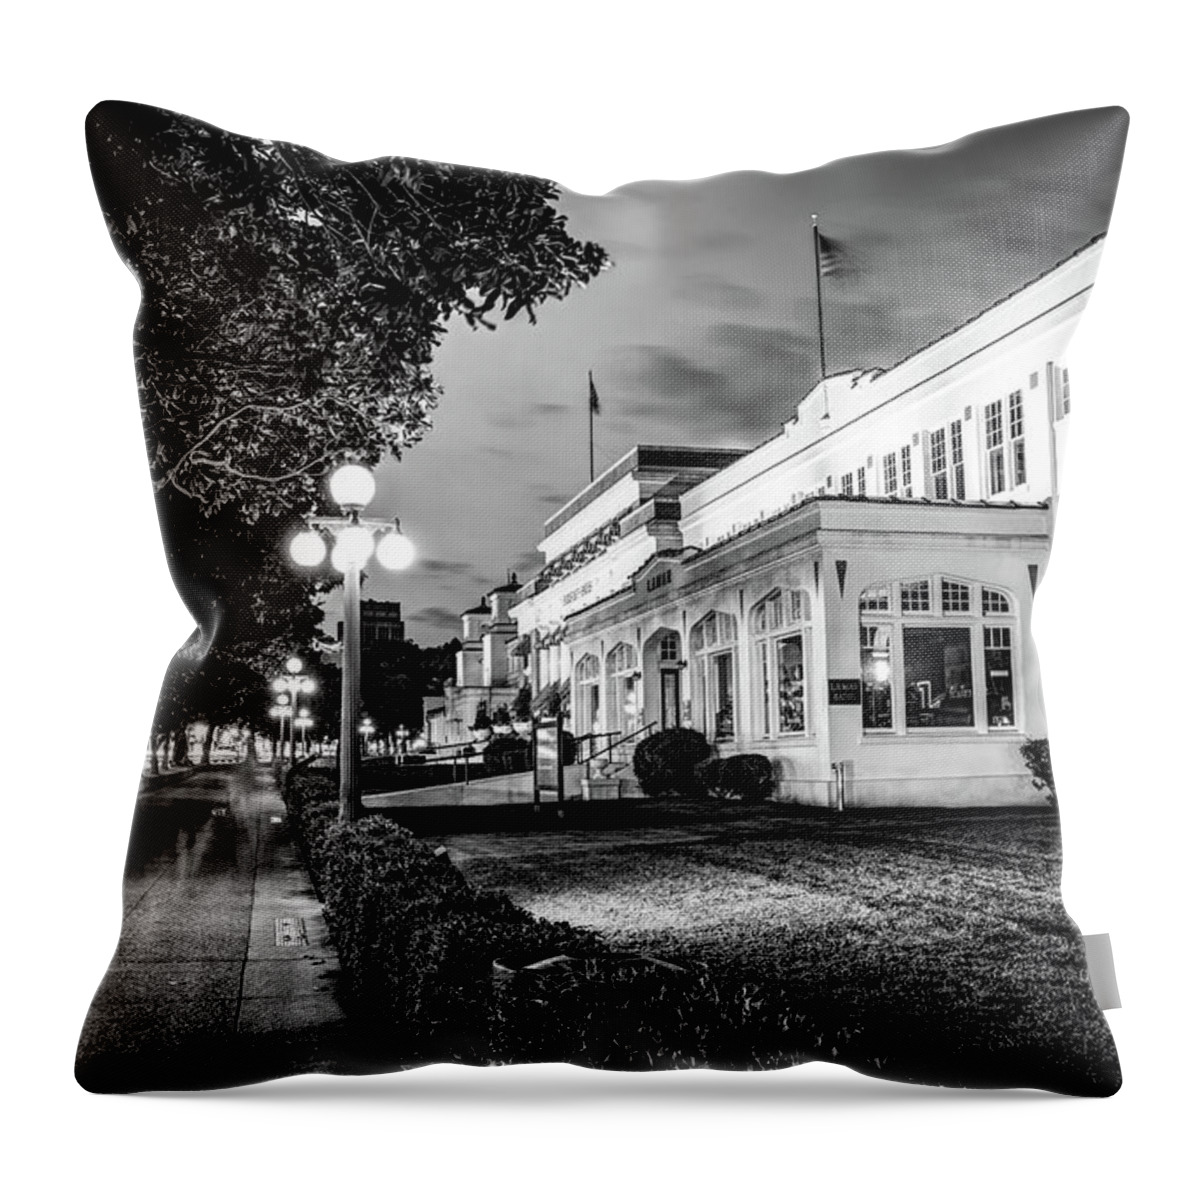 Hot Springs Throw Pillow featuring the photograph Lamar Bathhouse and Hot Springs Bathhouse Row at Dusk - Black and White by Gregory Ballos